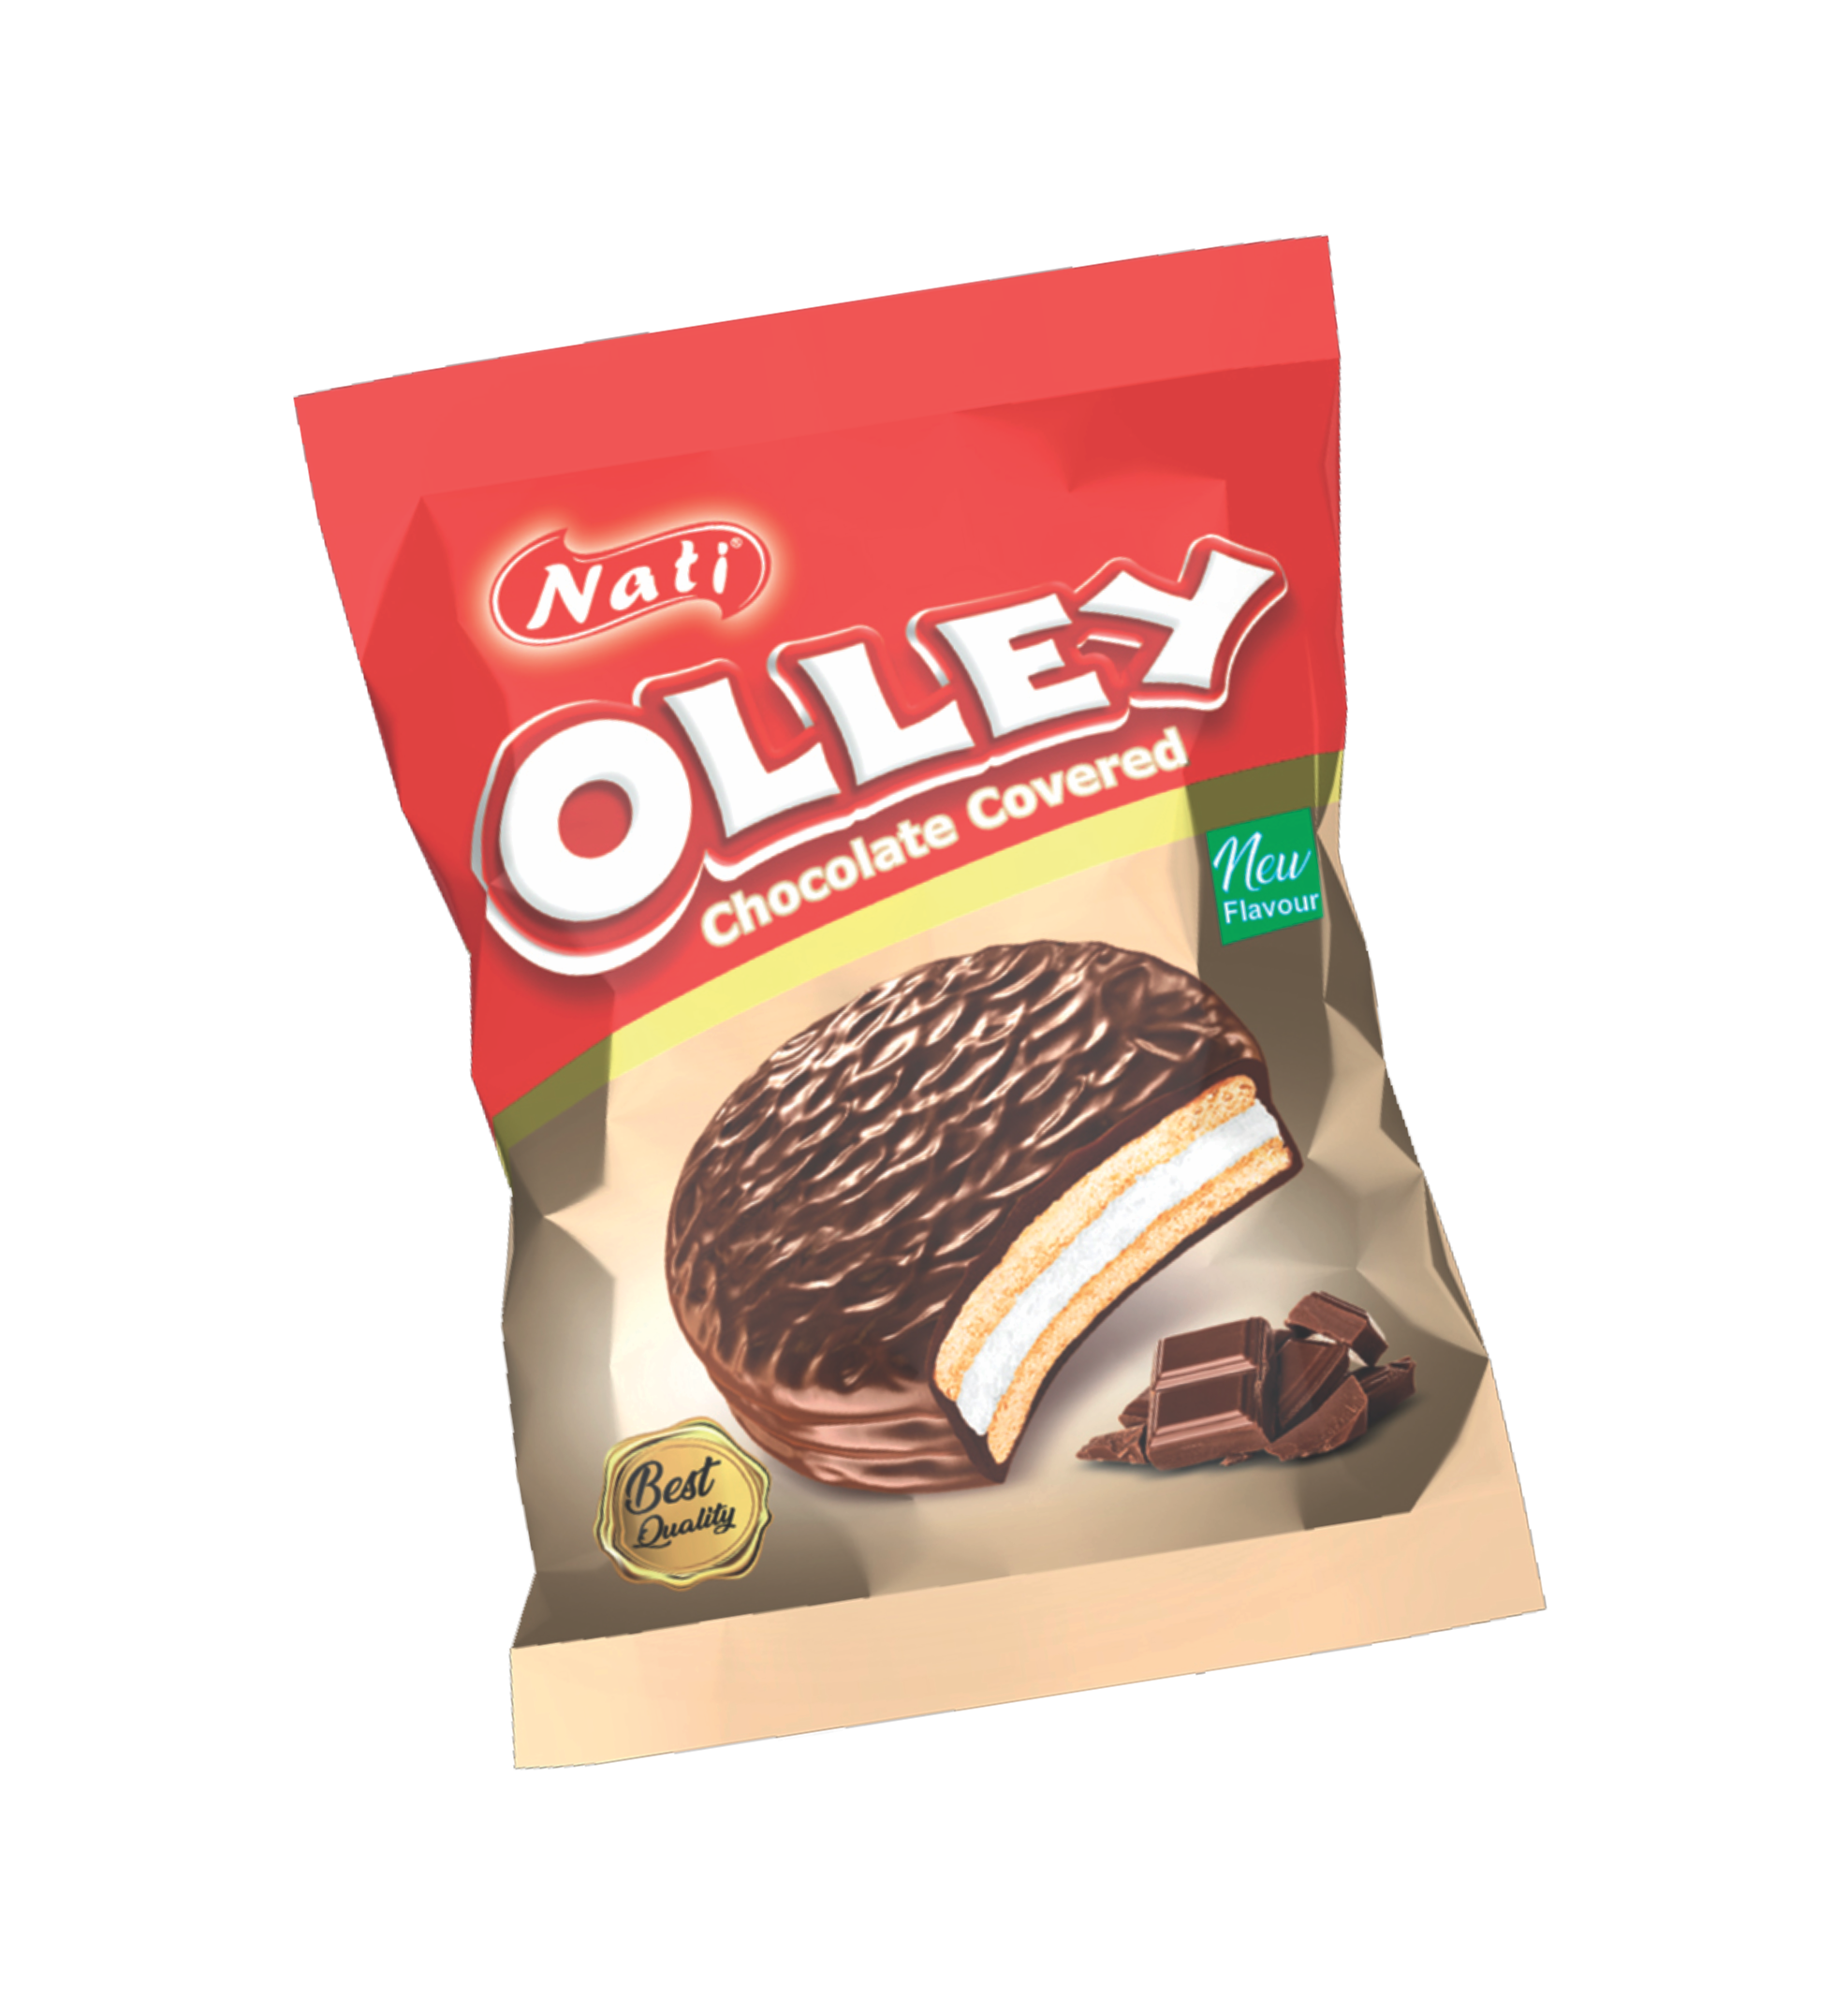 “OLLEY” CHOCOLATE COVERED MARSHMALLOW BISCUITS